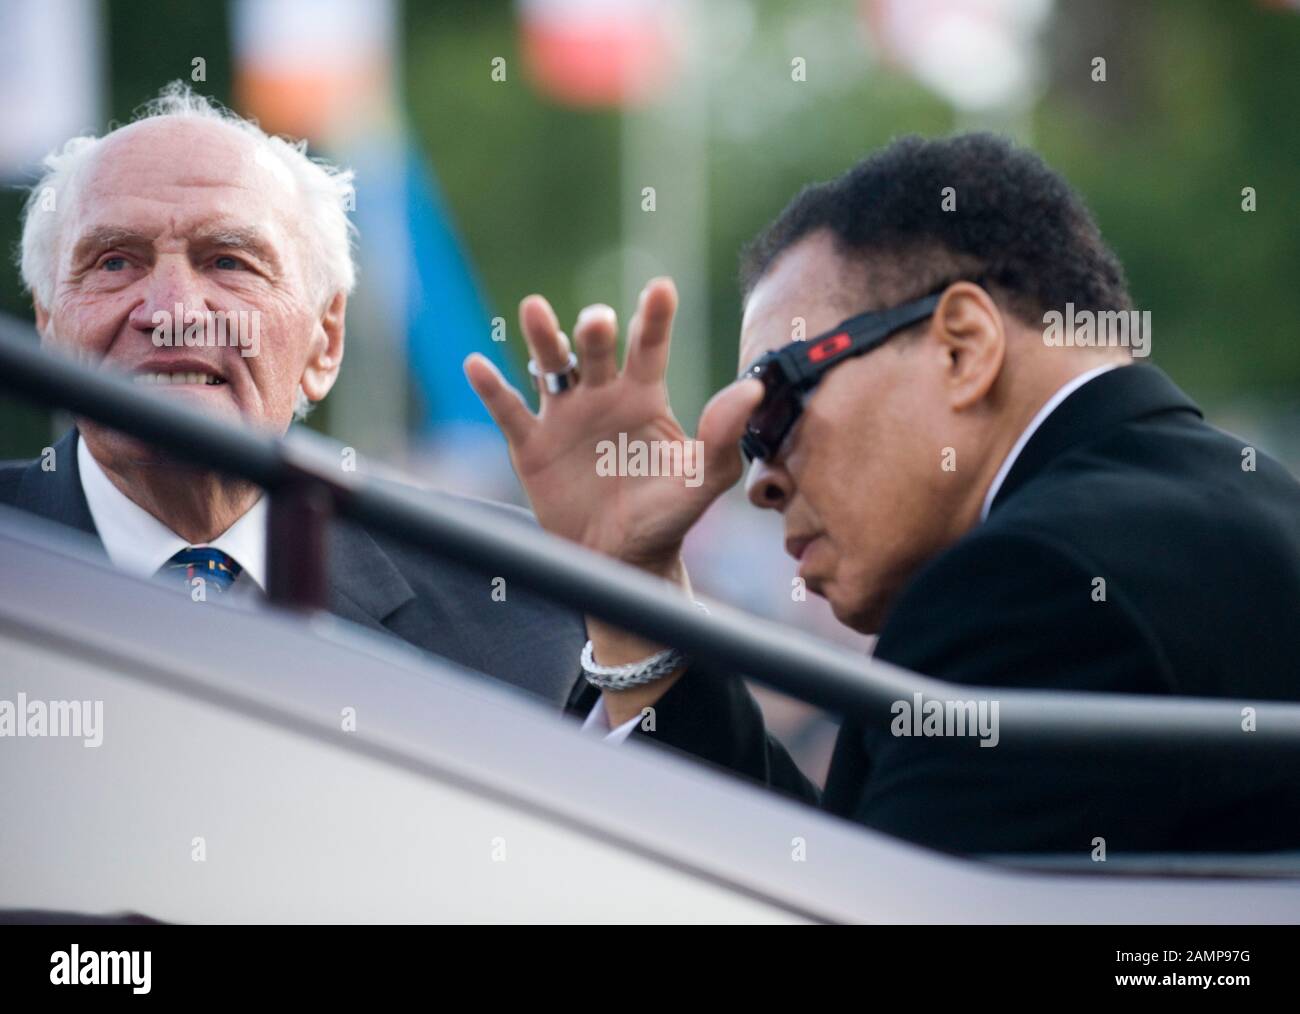 Muhammad Ali with wife Veronica and Sir Henry Cooper arrive in an Open top Range Rover belonging to the Royal Household  at the FEI Alltech Windsor European Jumping And Dressage Championships held at Windsor Castle. Stock Photo